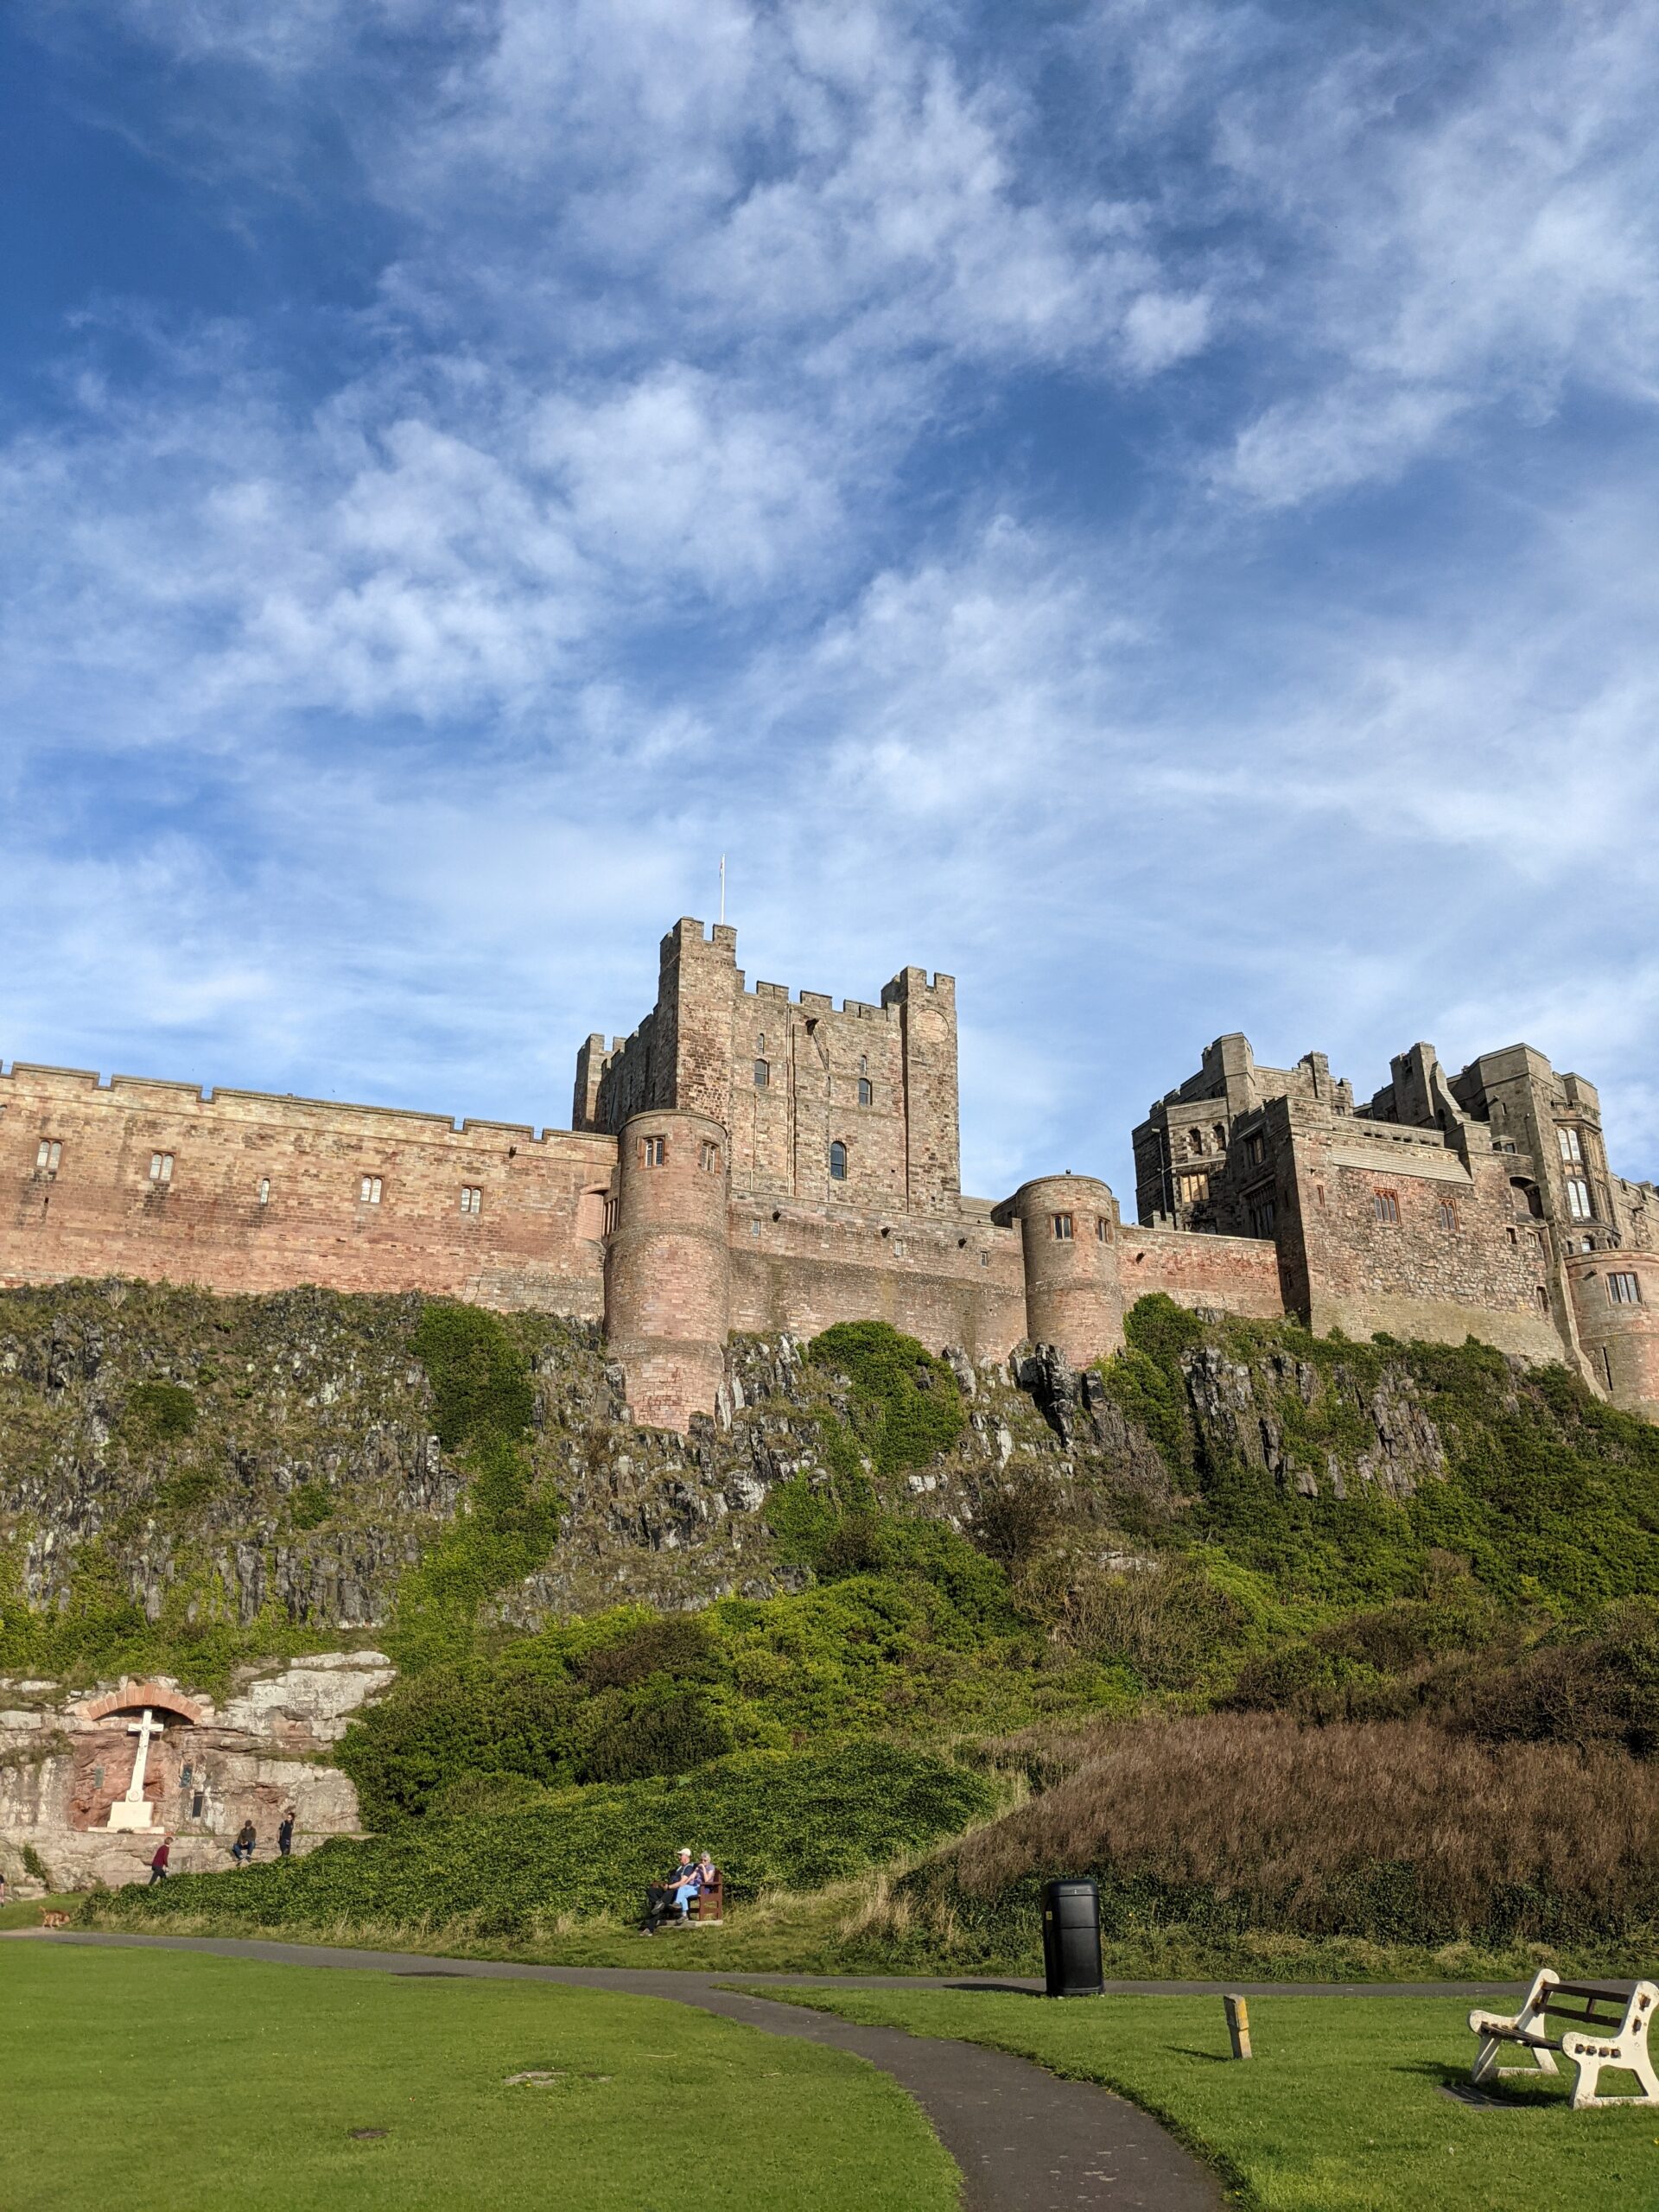 The Earls of Bamburgh